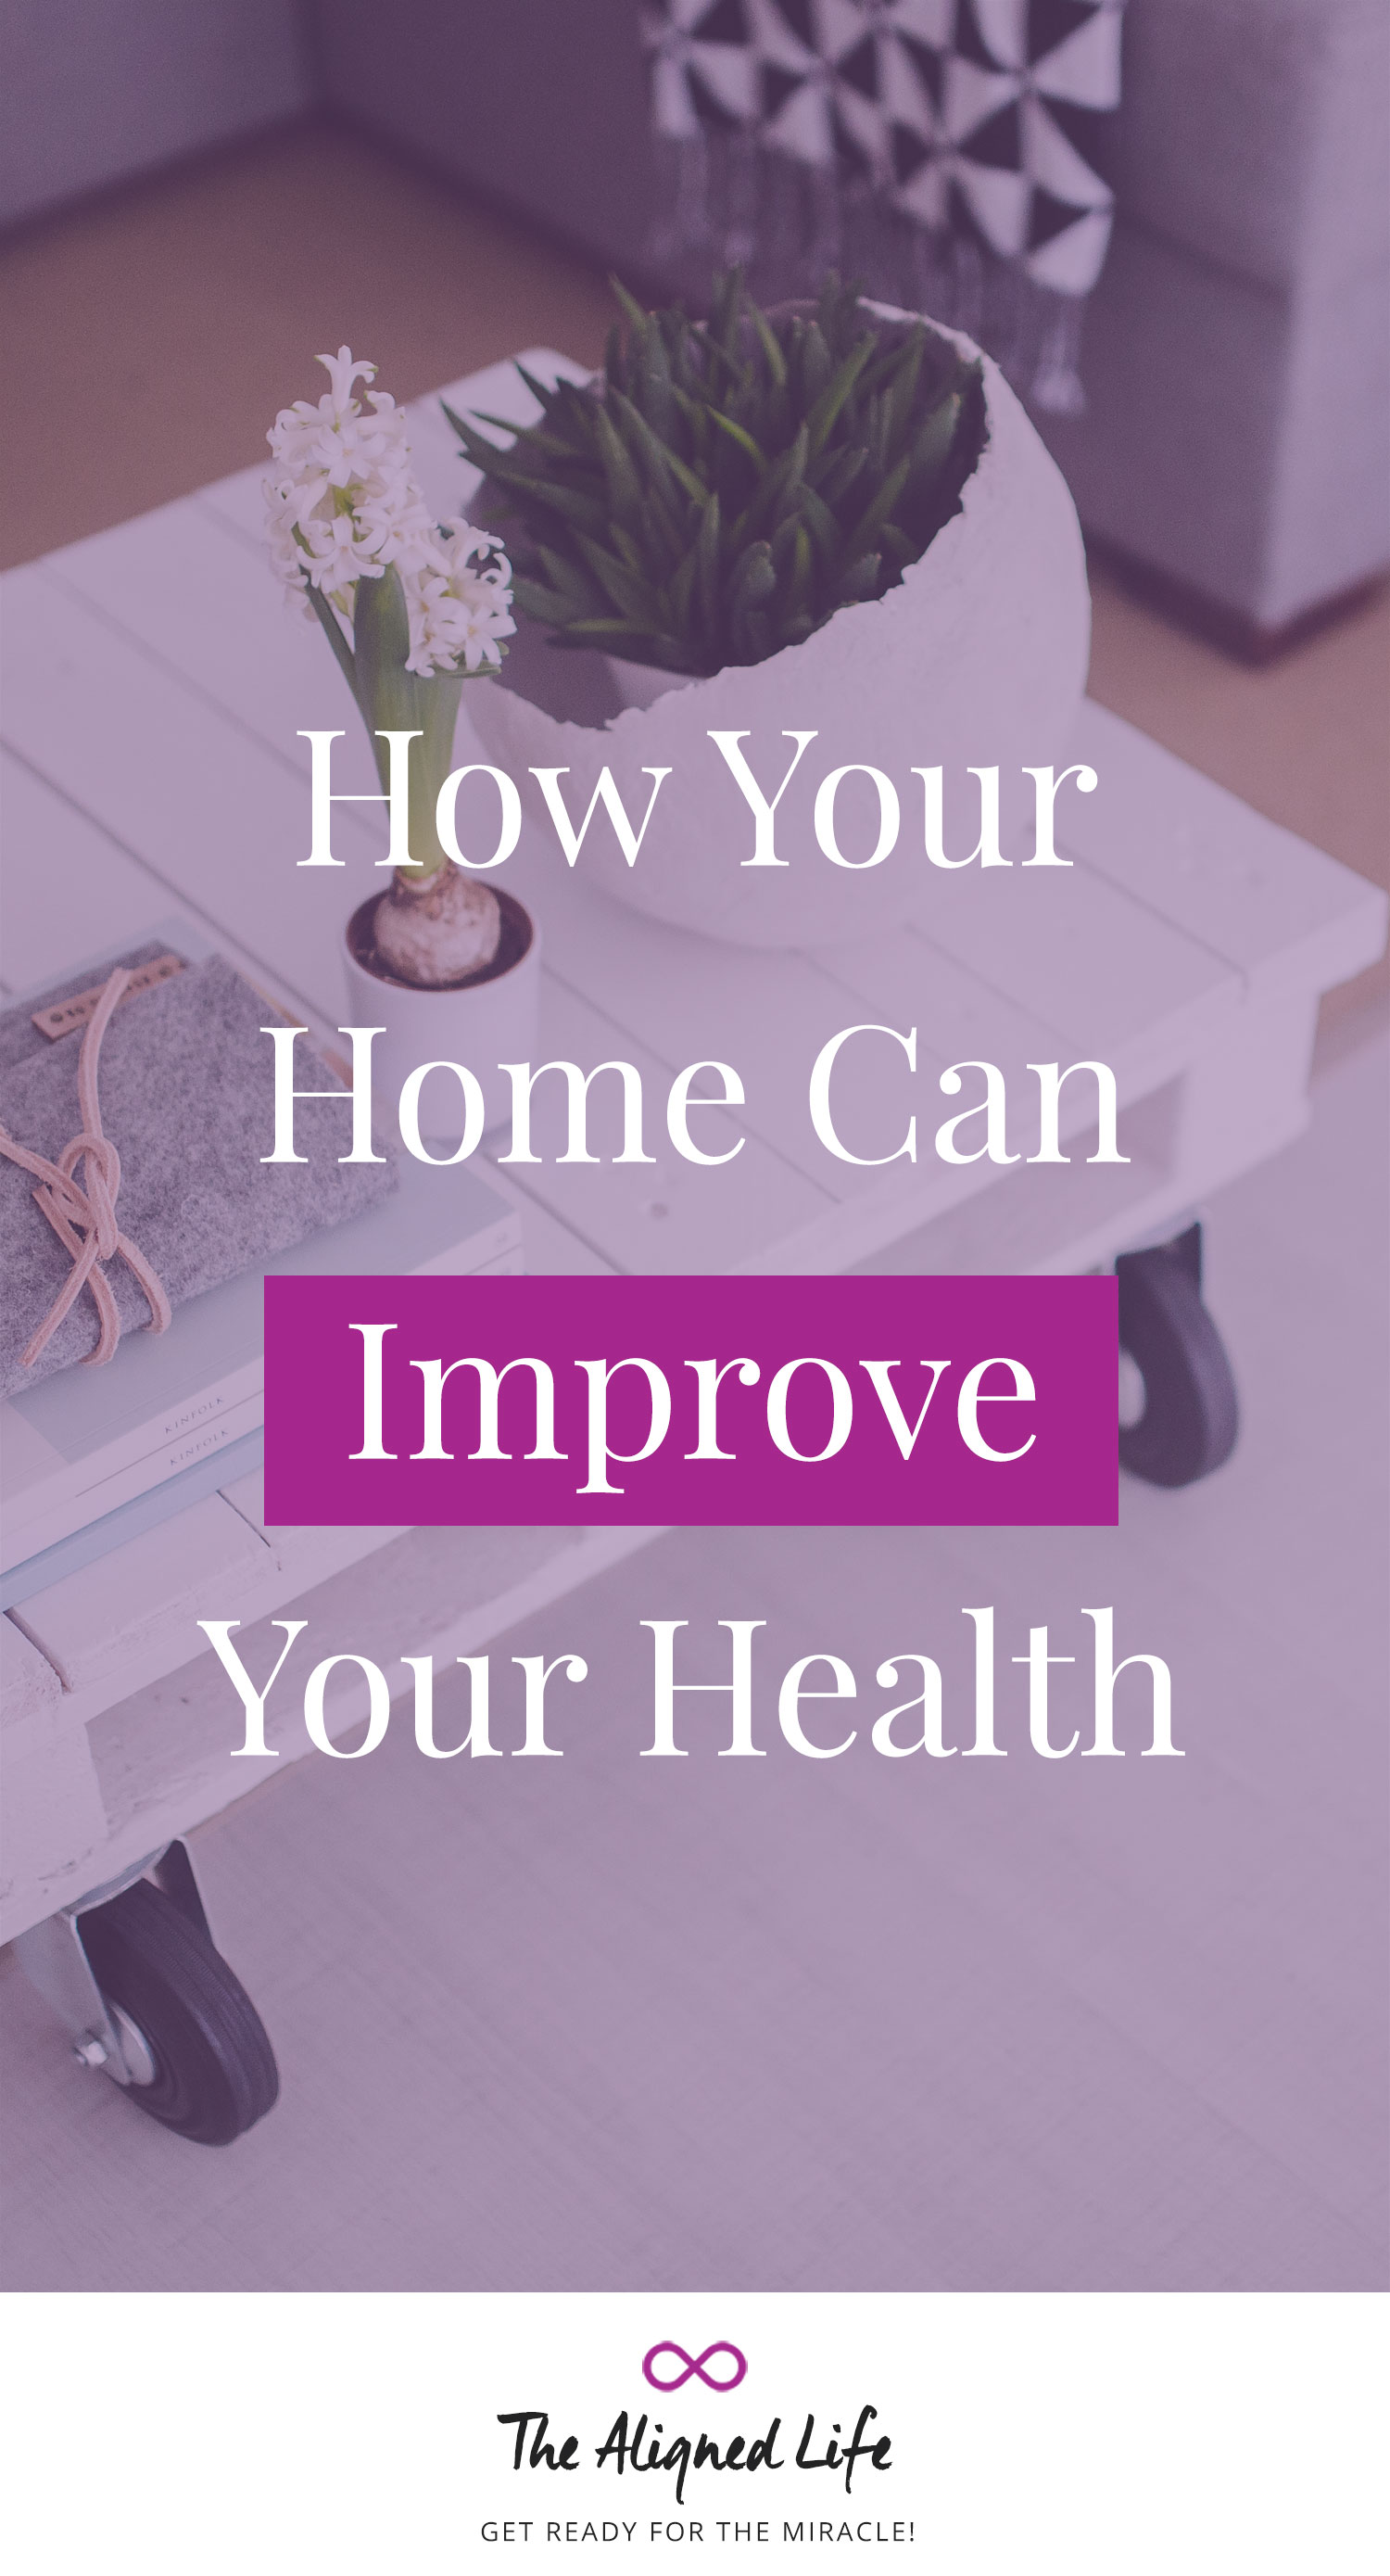 How Your Home Can Improve Your Health